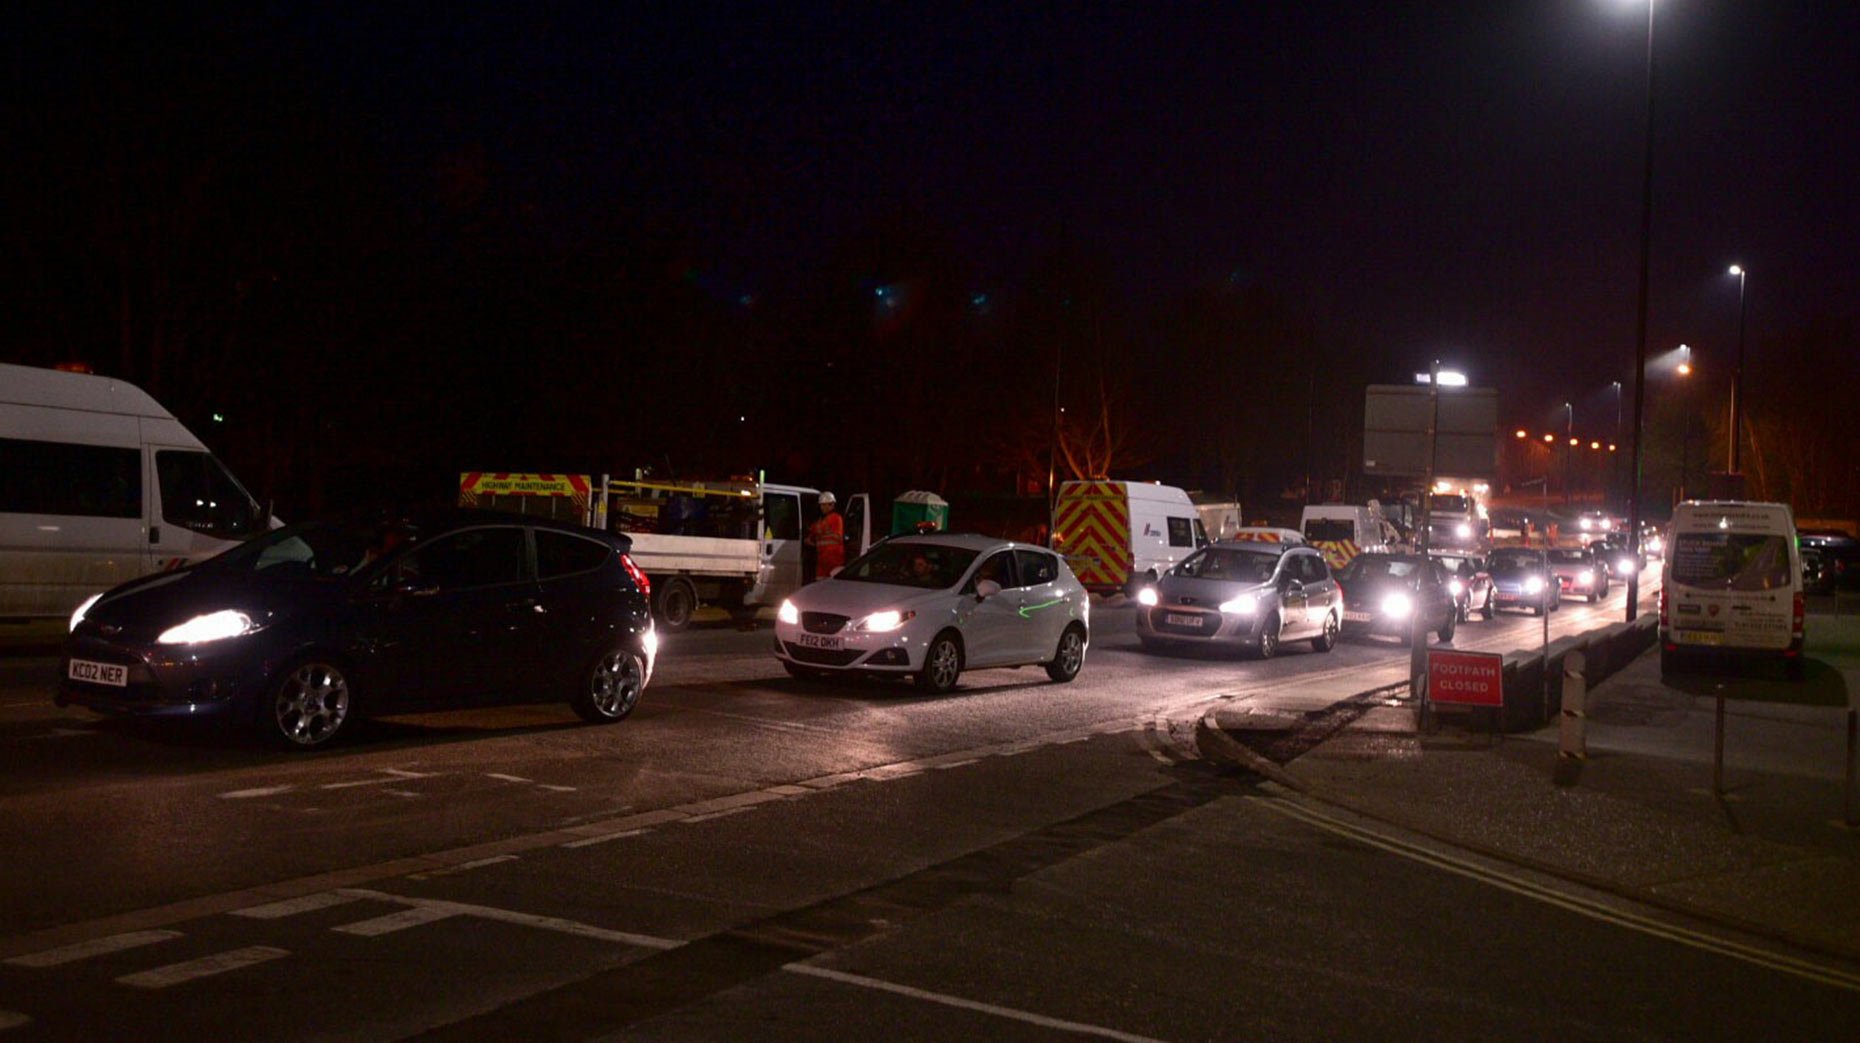 Closure in the Canwick Road area have caused disruption to some motorists overnight over the last 10 nights. 